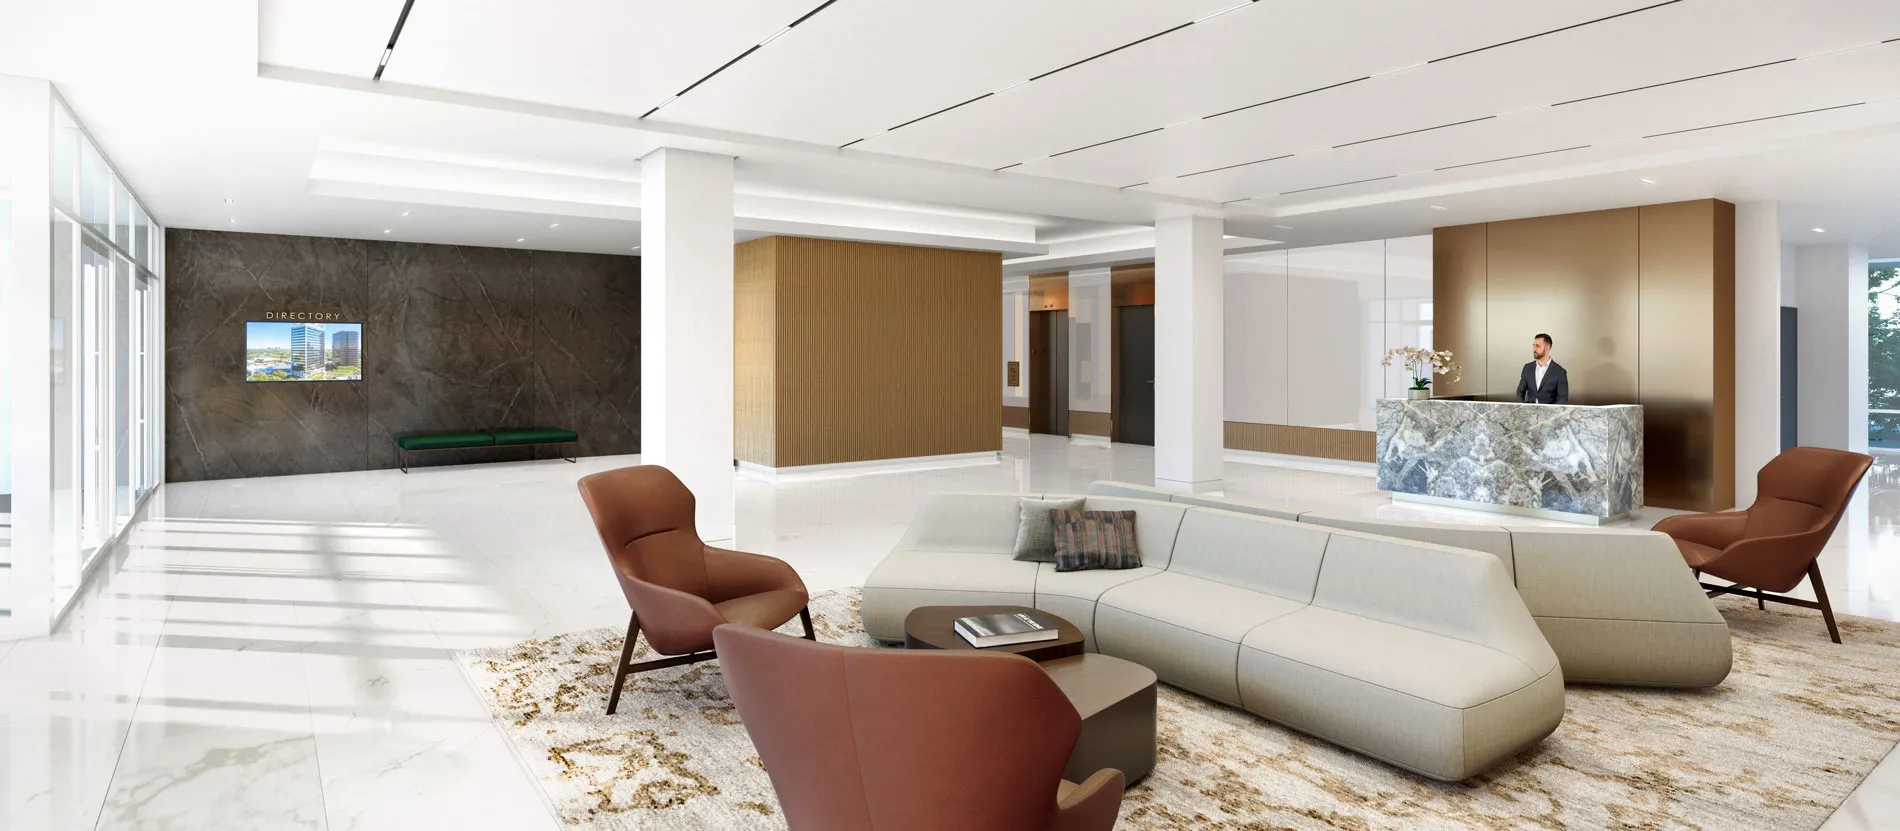 RENDERING OF REDESIGNED OFFICE LOBBY